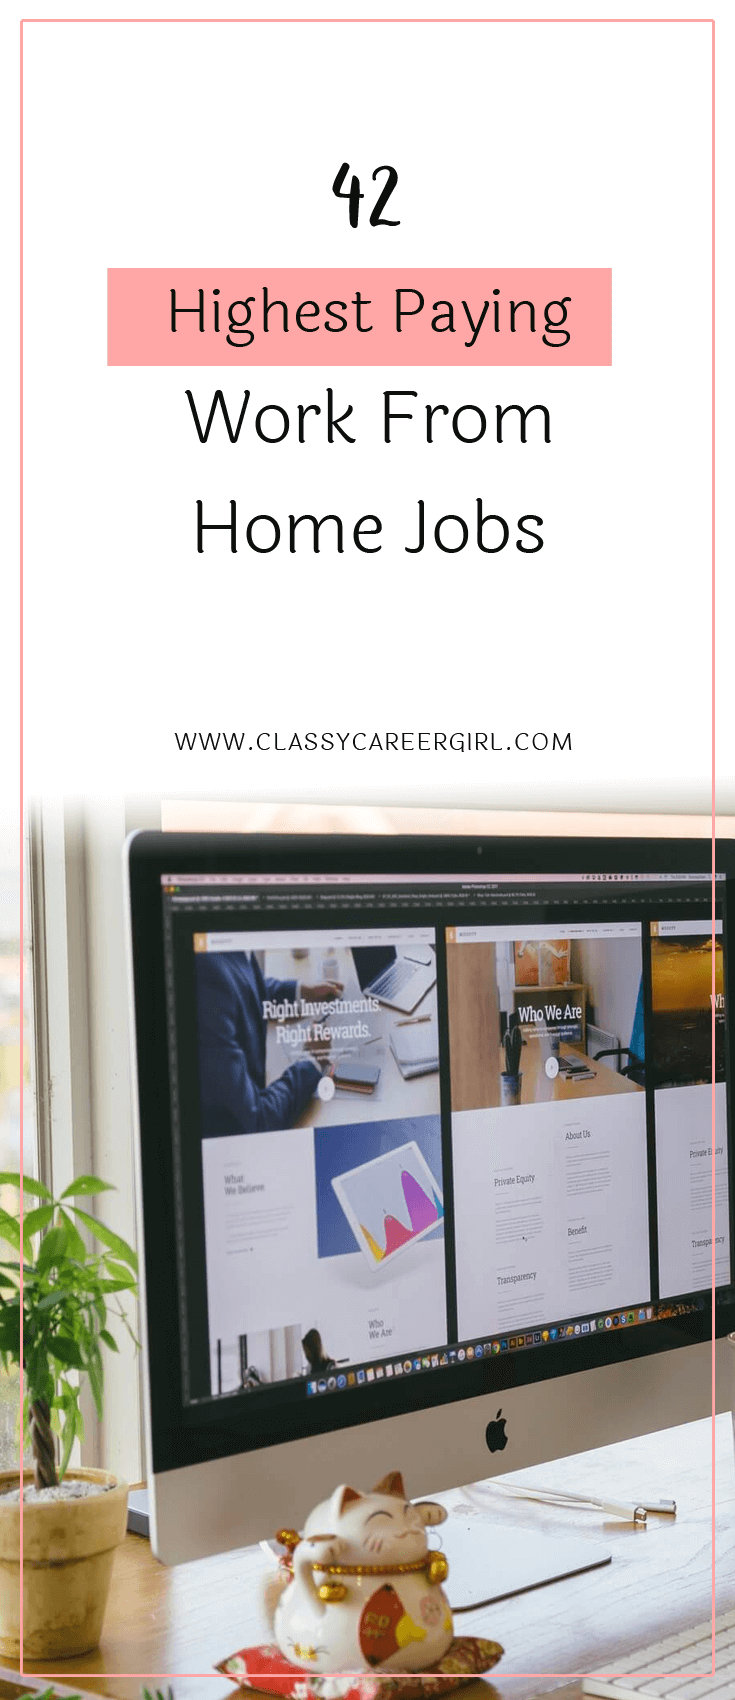 42 Highest Paying Work From Home Jobs [INFOGRAPHIC] Classy Career Girl